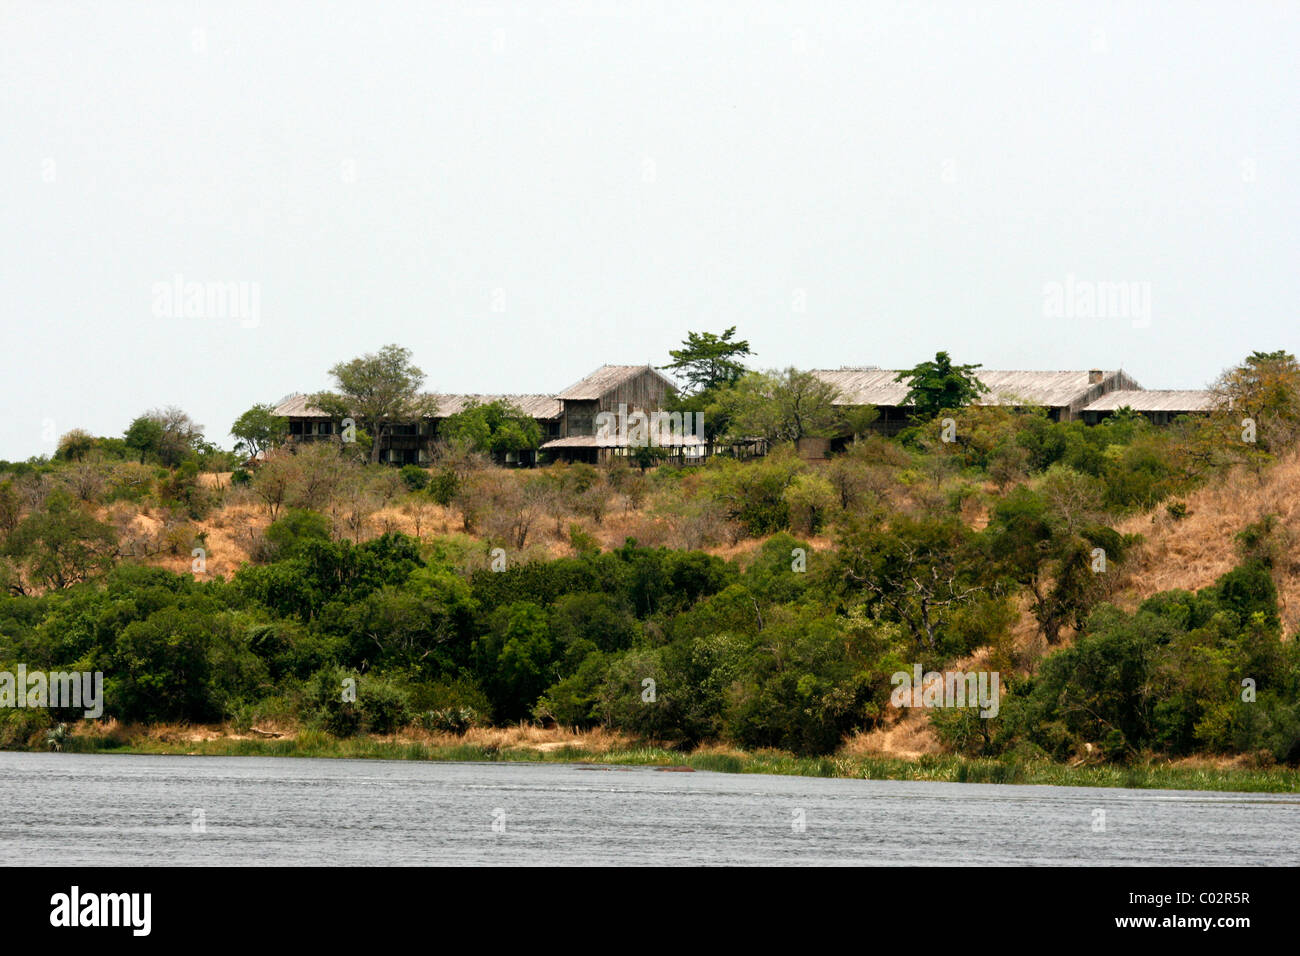 The upmarket Paraa Lodge seen from the River Nile below the Murchison Falls, Uganda Stock Photo